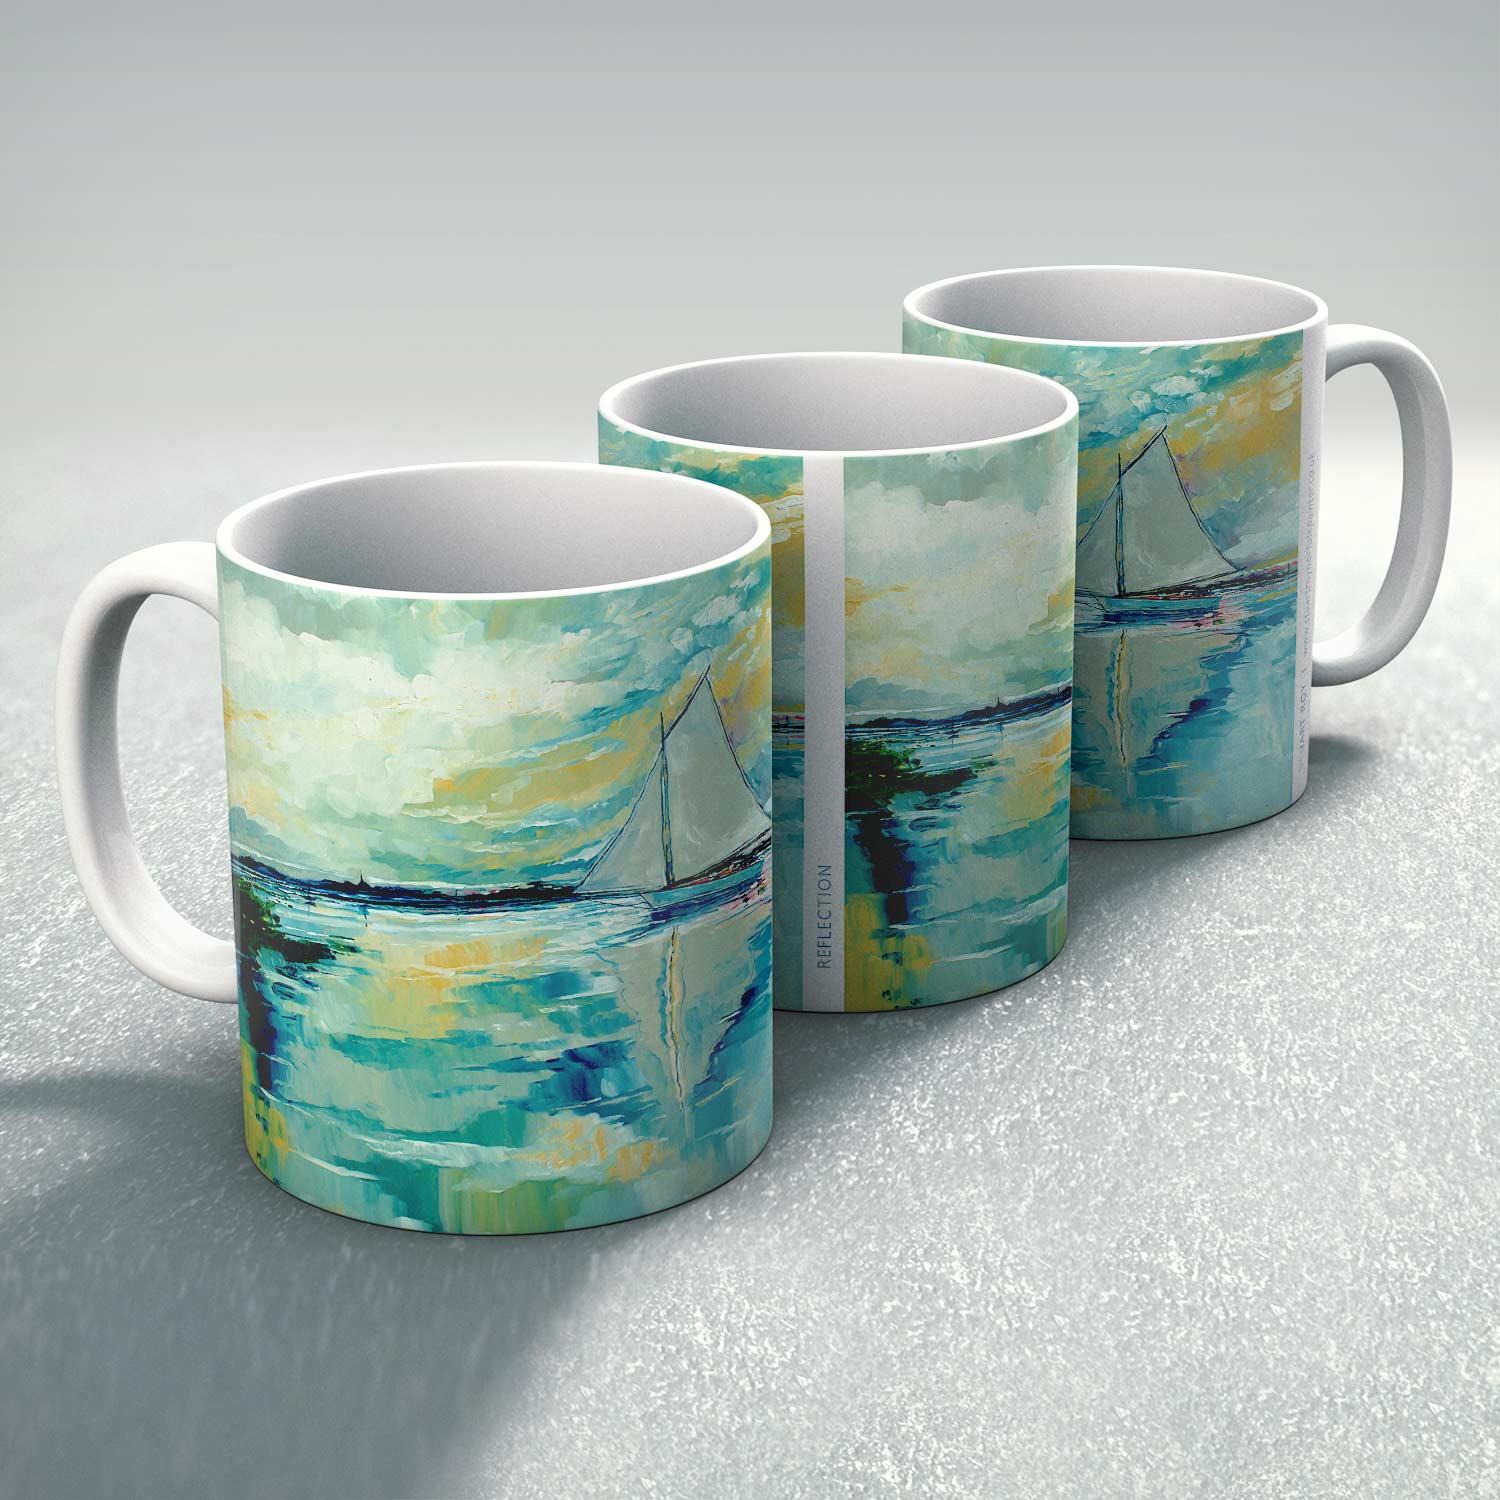 Reflection Mug from an original painting by artist Stuart Roy